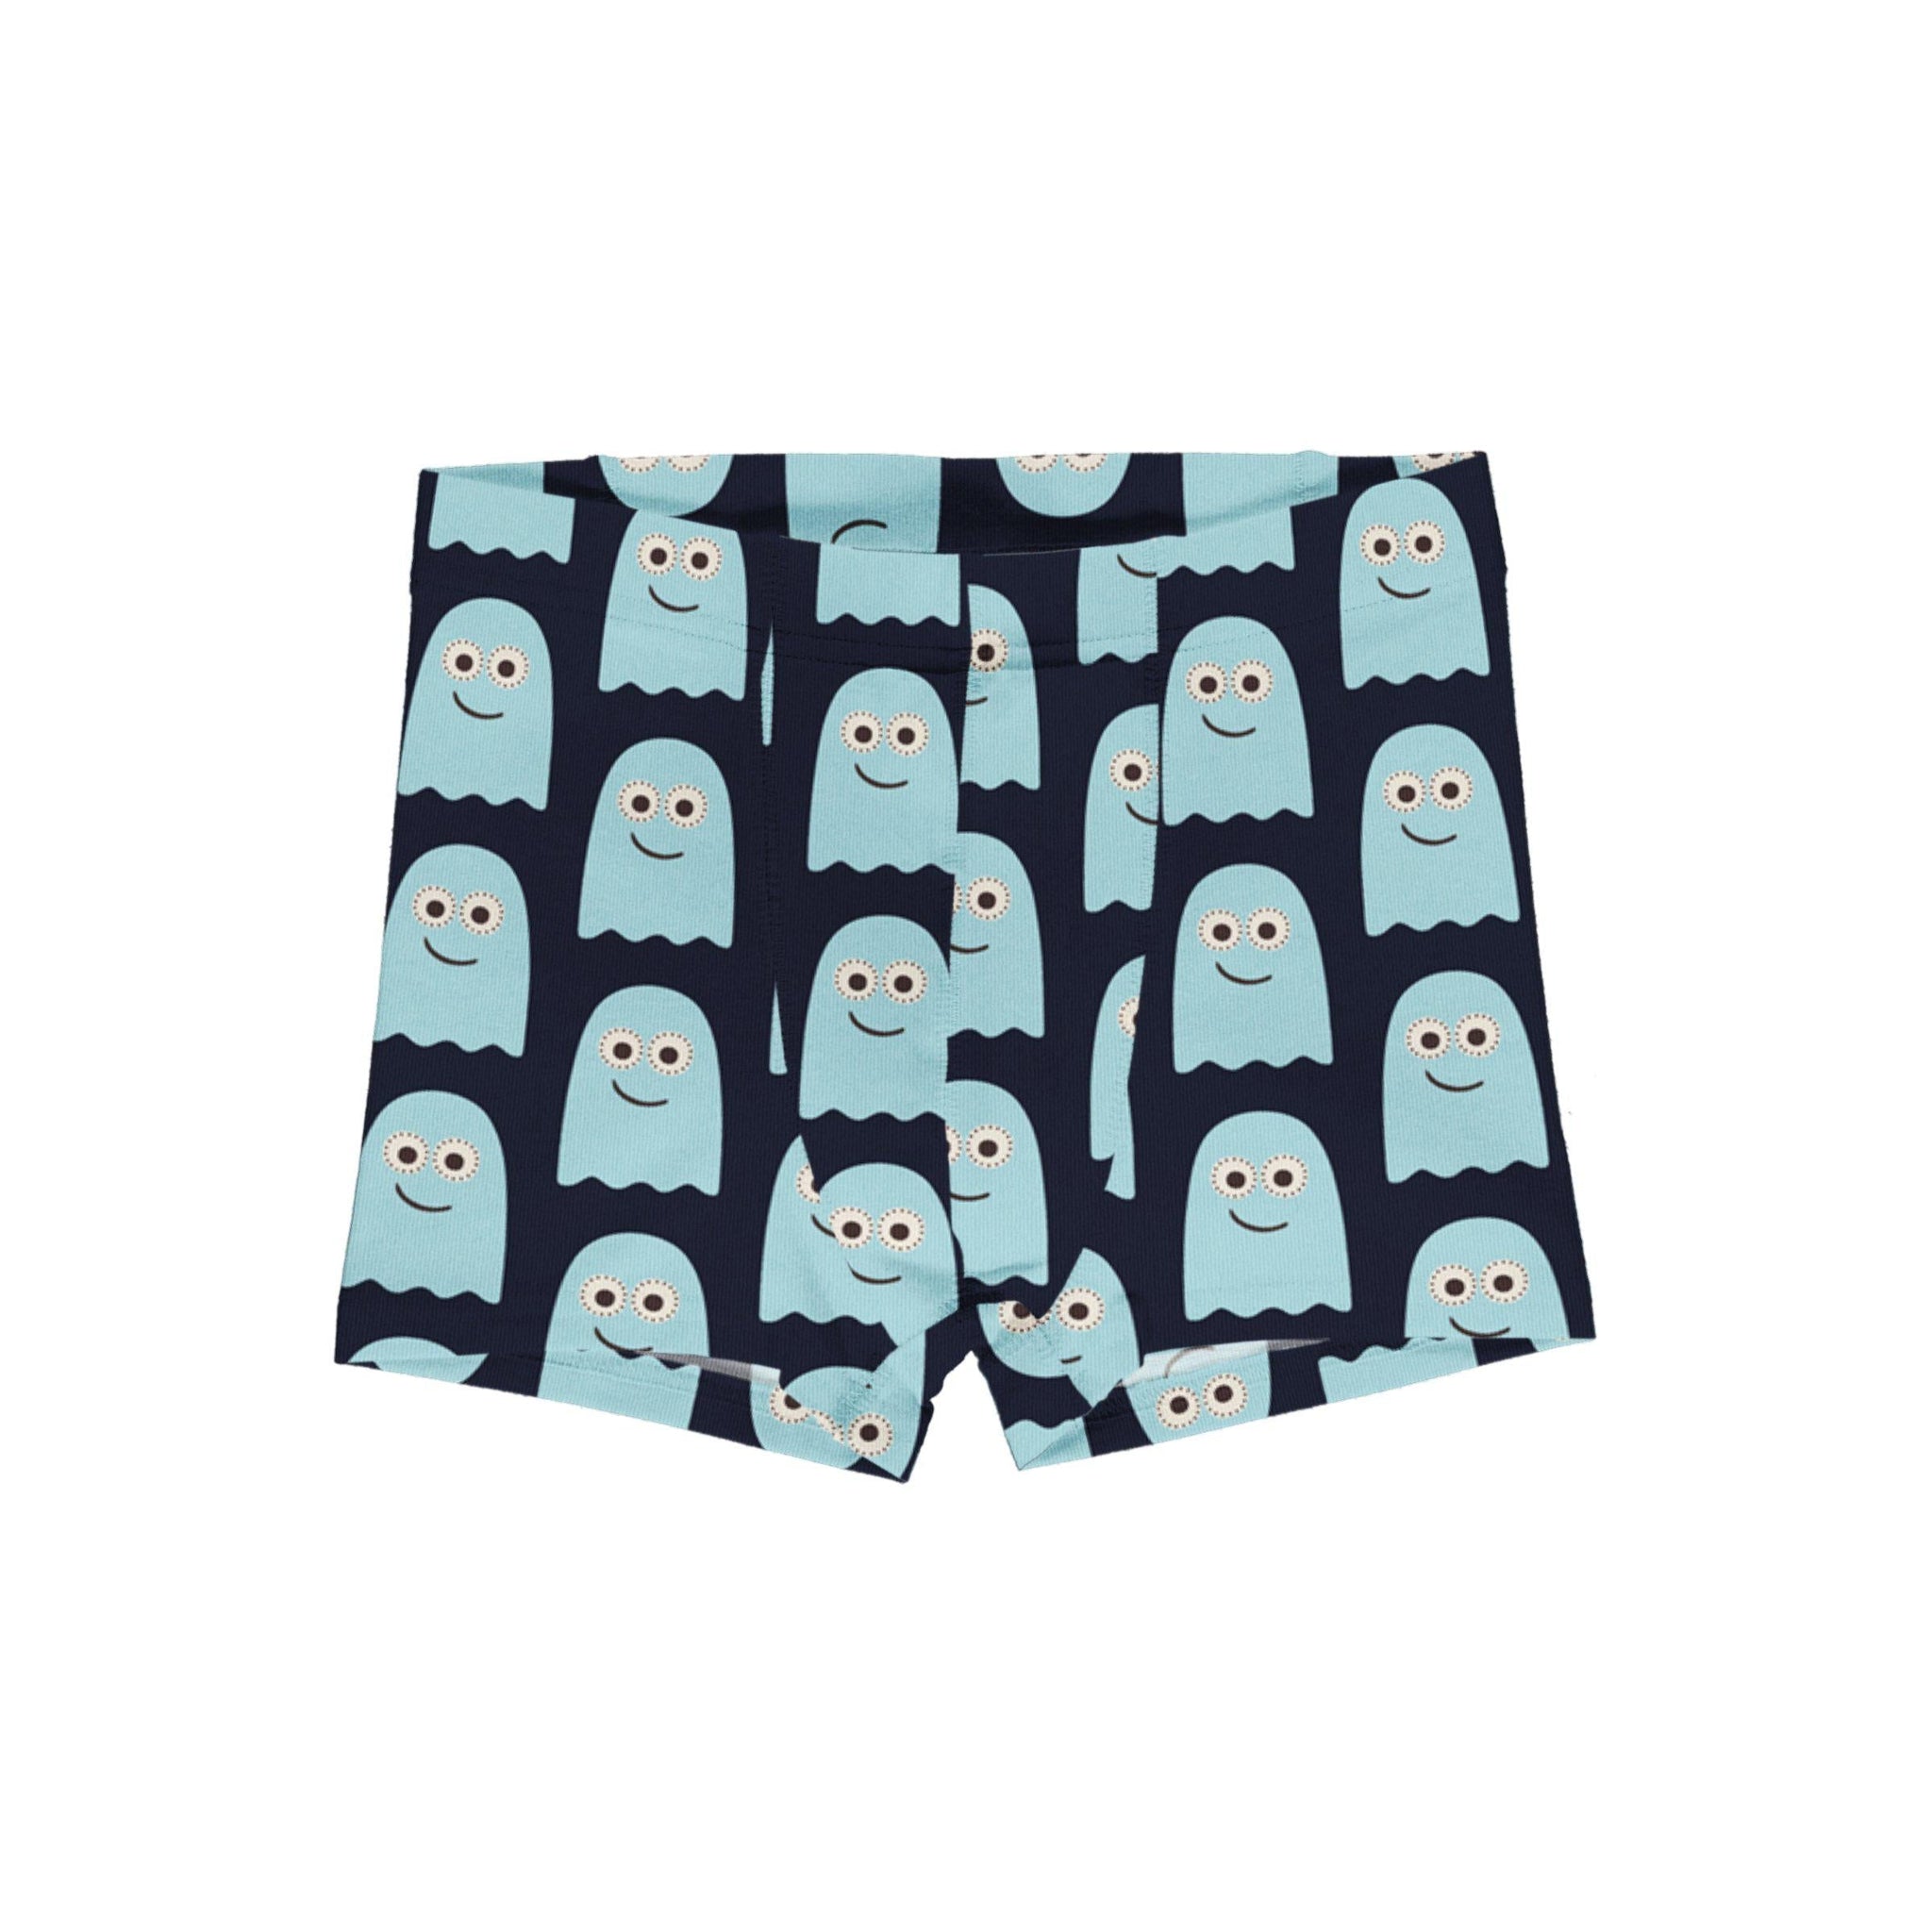 Maxomorra - Classic Ghost Boxer Shorts (18-24 Months)